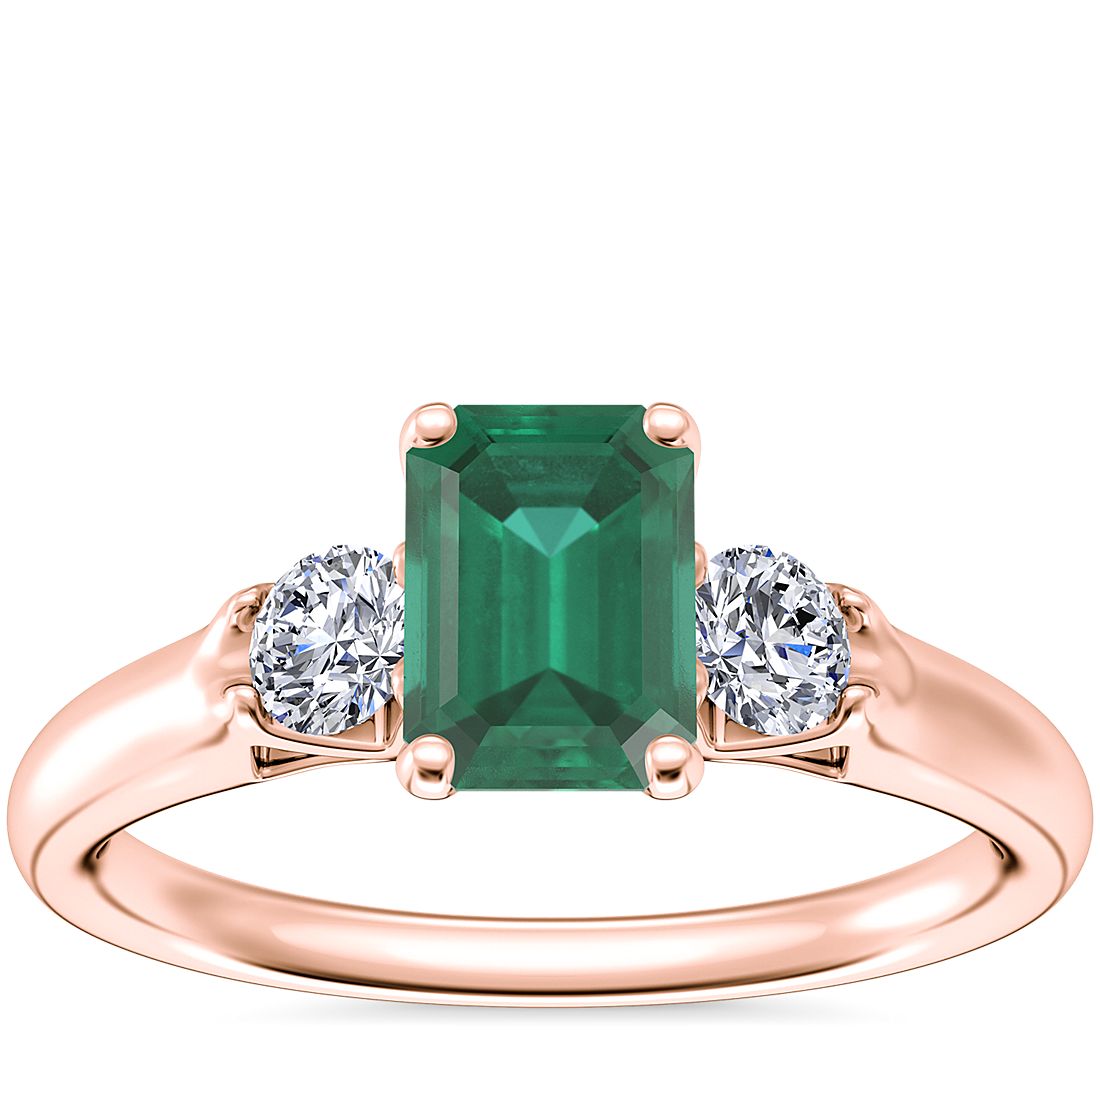 Classic Three Stone Engagement Ring with Emerald-Cut Emerald in 14k Rose Gold (7x5mm)